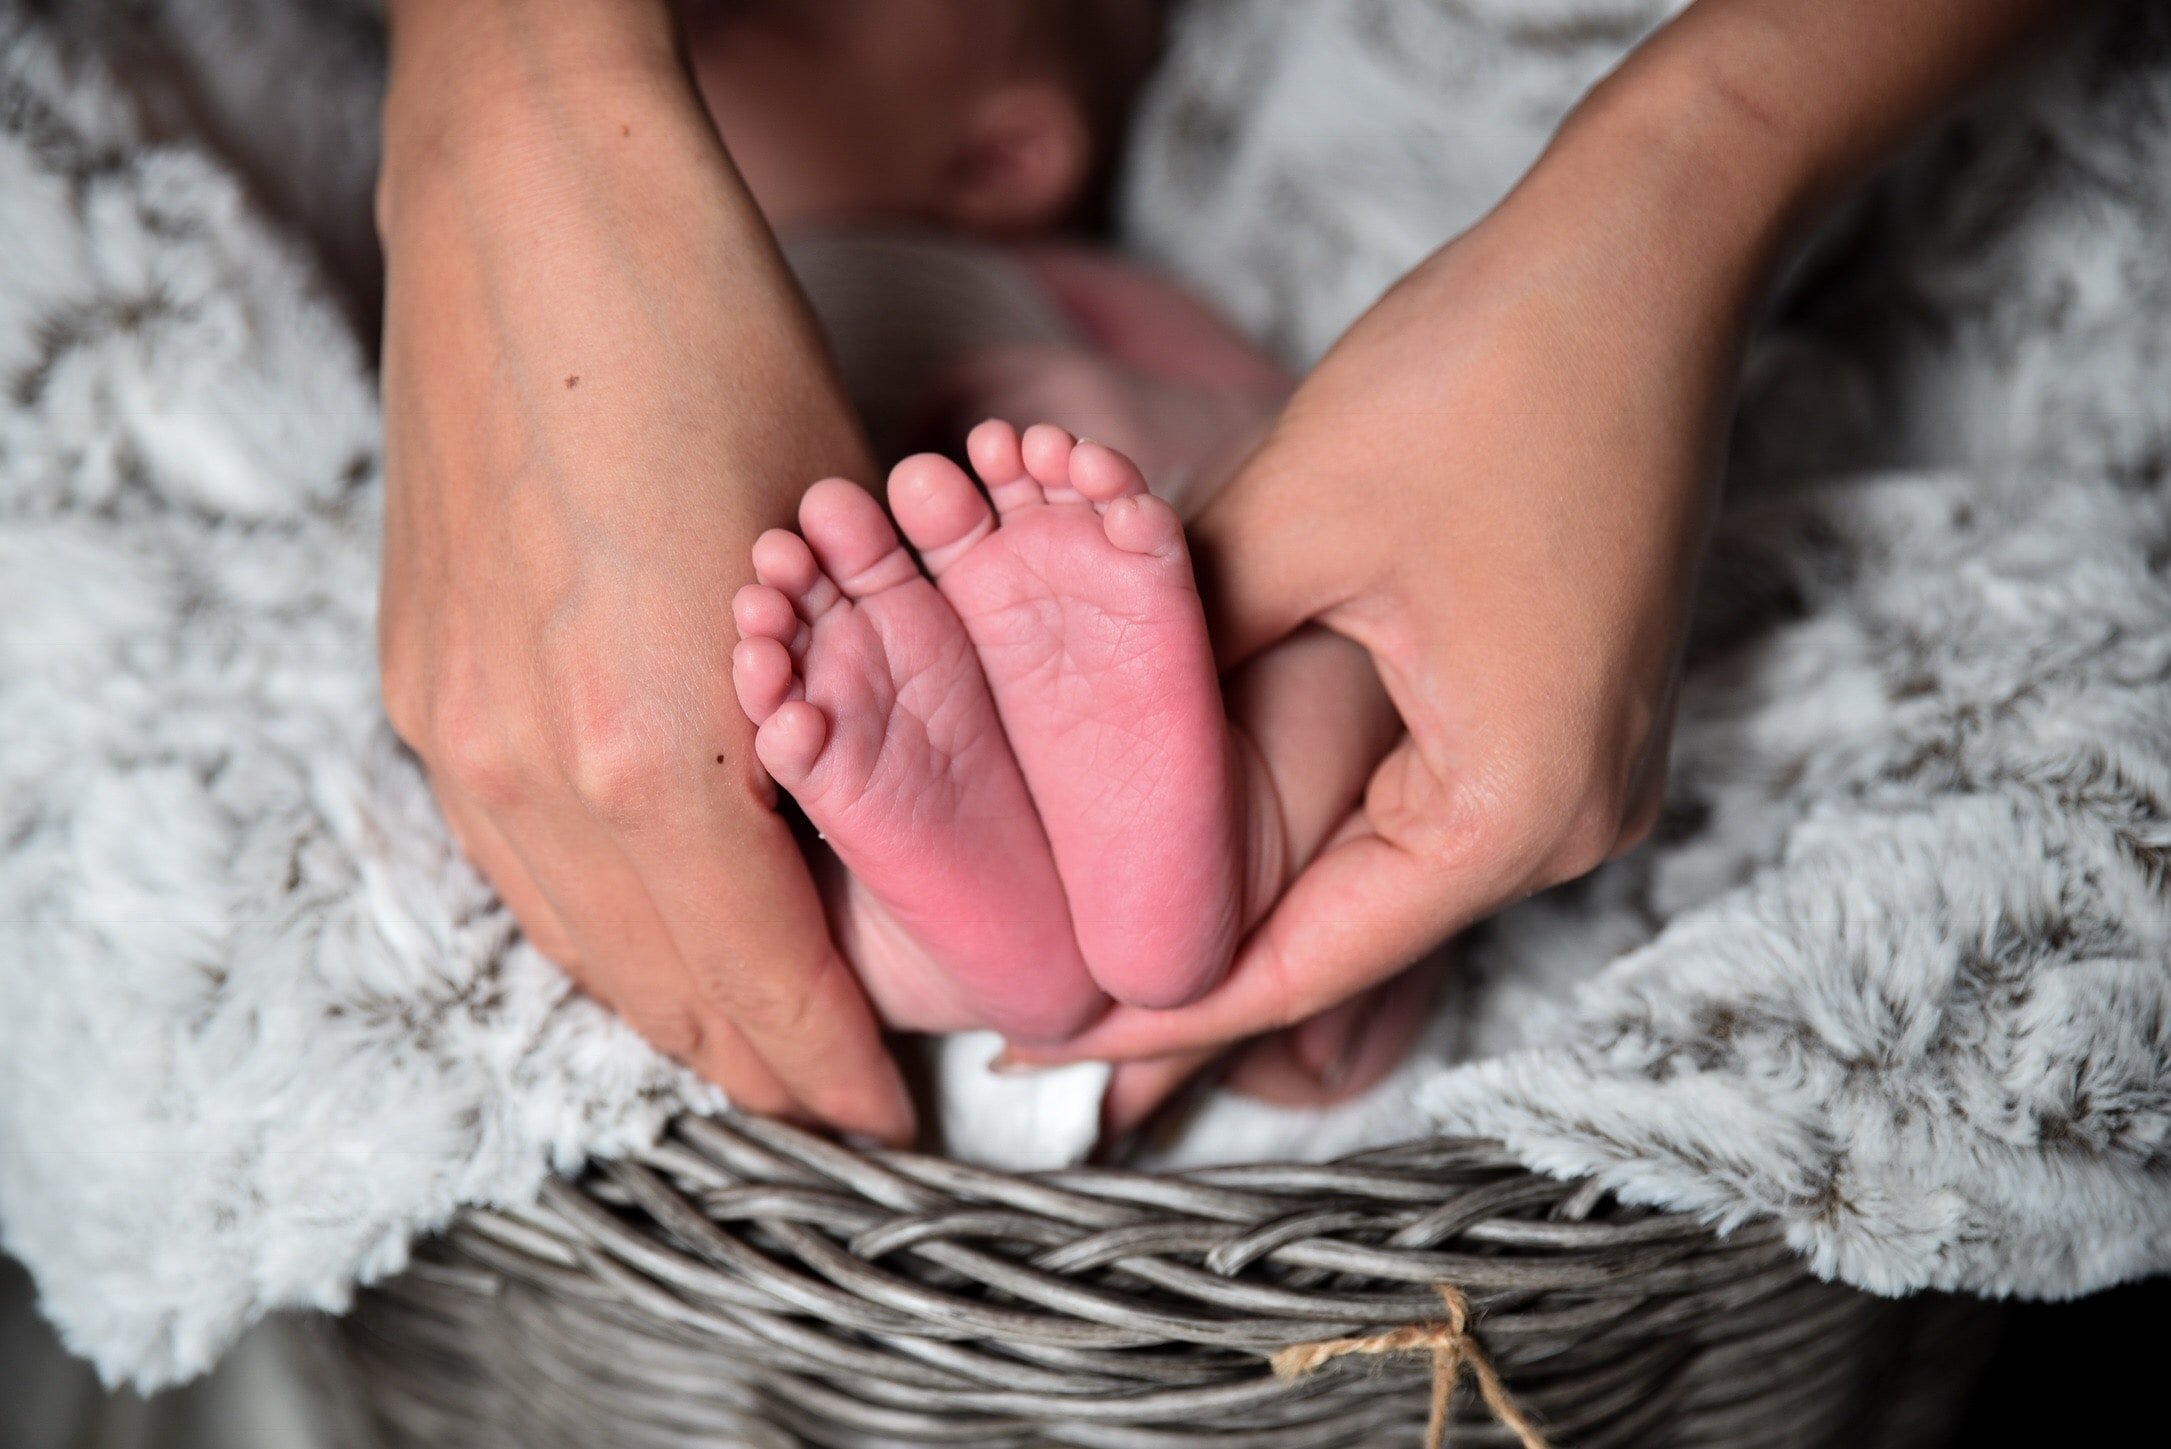 A sweet pic of a baby's feet held by a lady | Photo by Eric Froehling on Unsplash